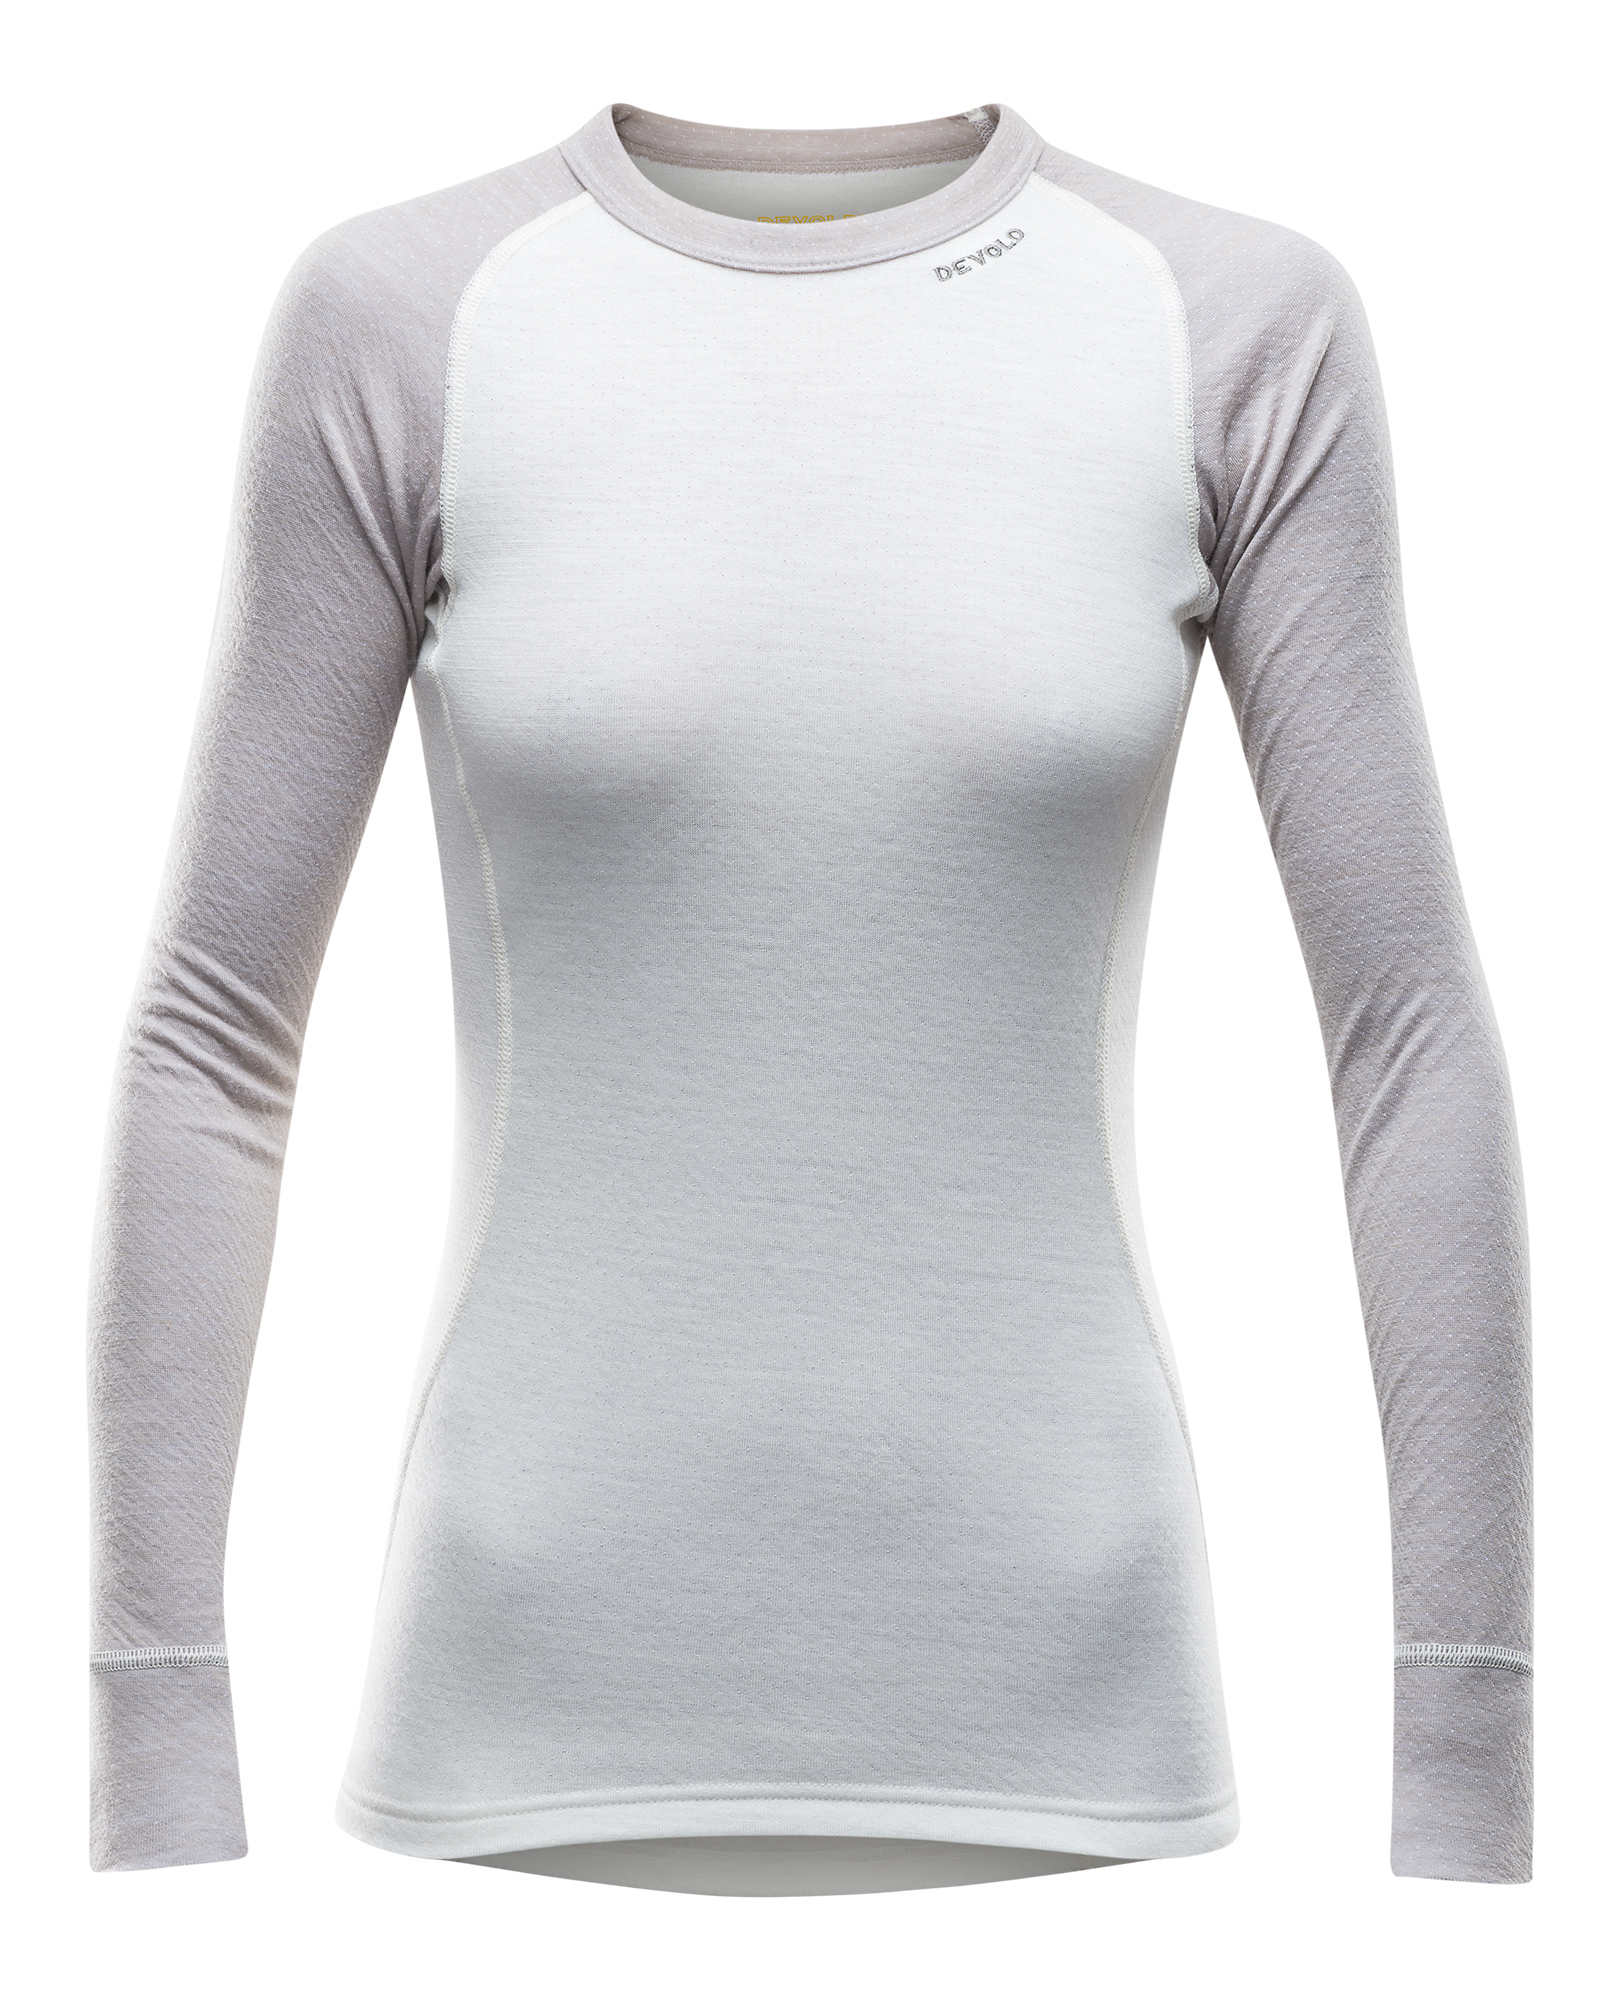 Devold Duo Active Woman Shirt - Offwhite